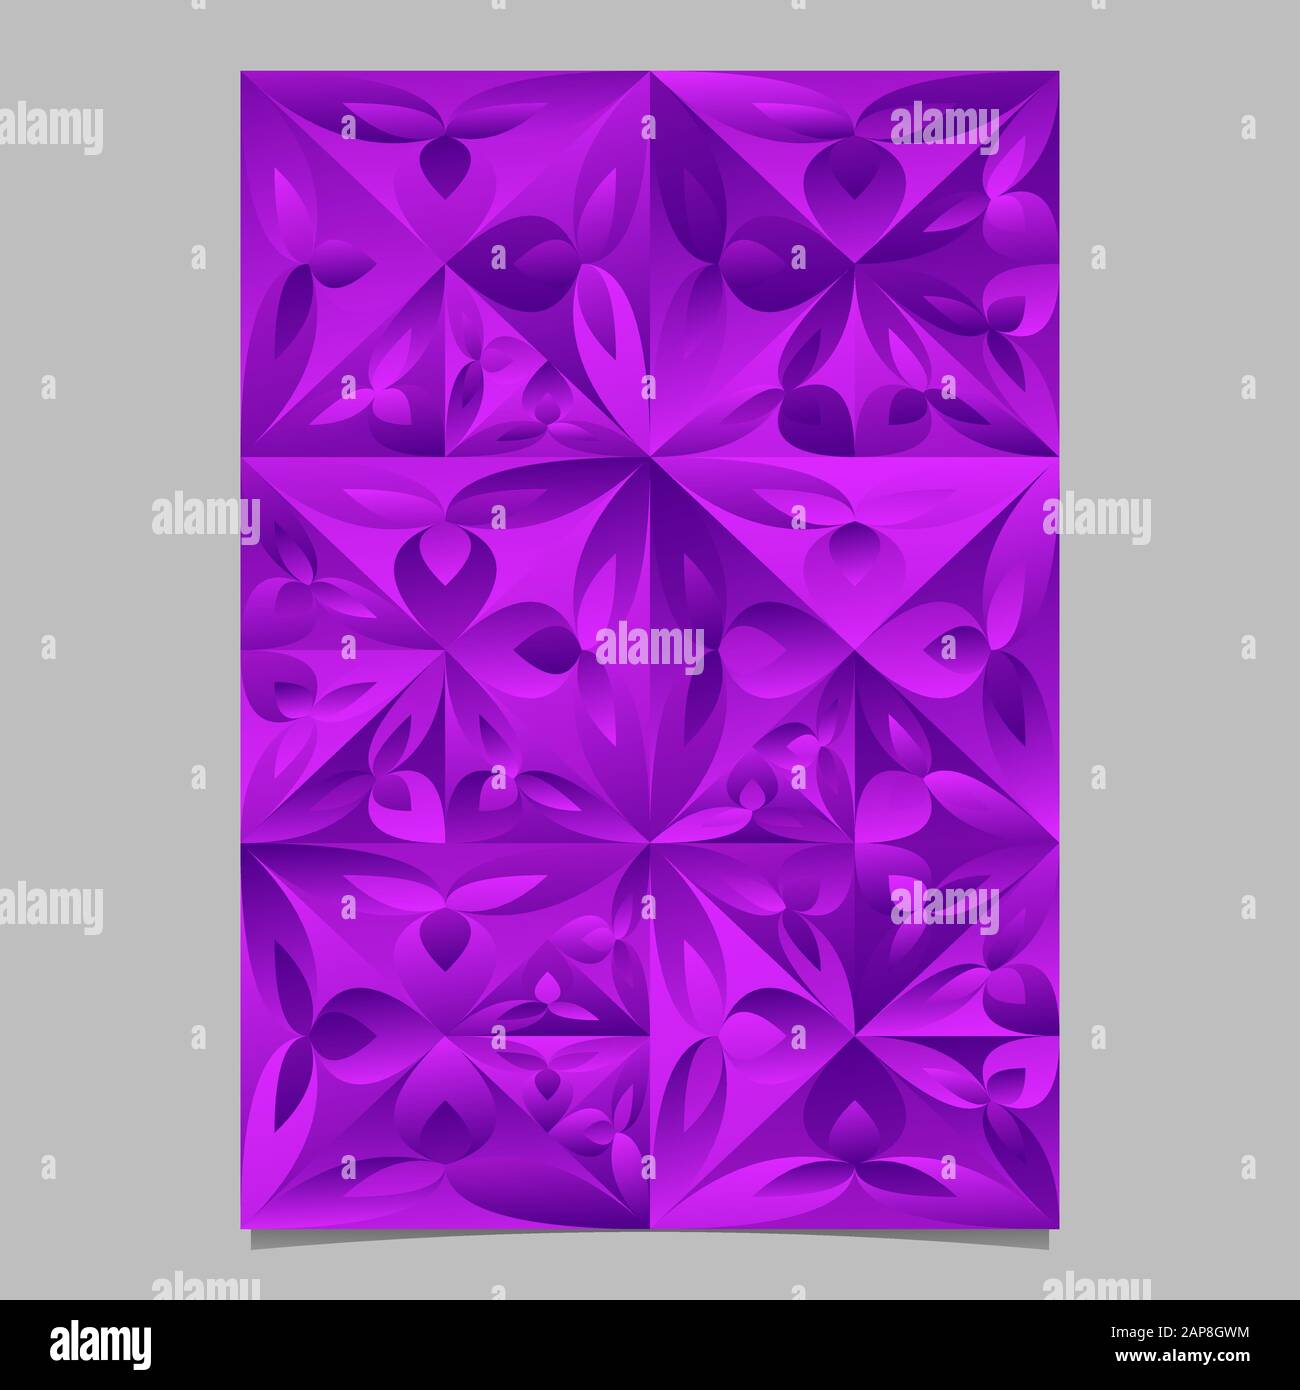 Geometrical floral mosaic poster template design - violet abstract gradient vector brochure Stock Vector